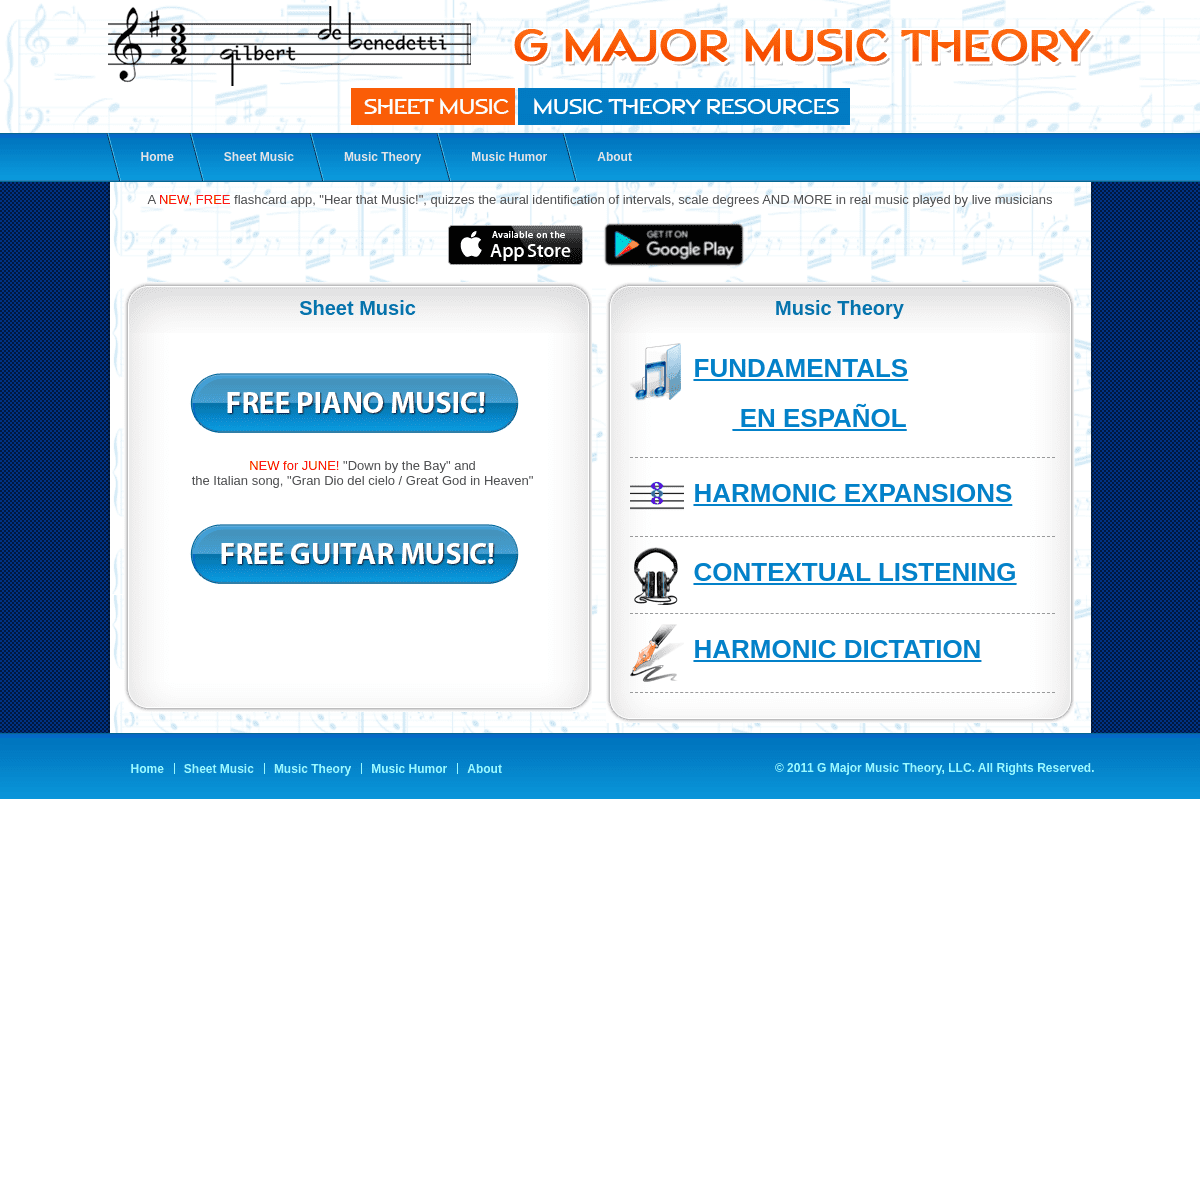 A complete backup of https://gmajormusictheory.org